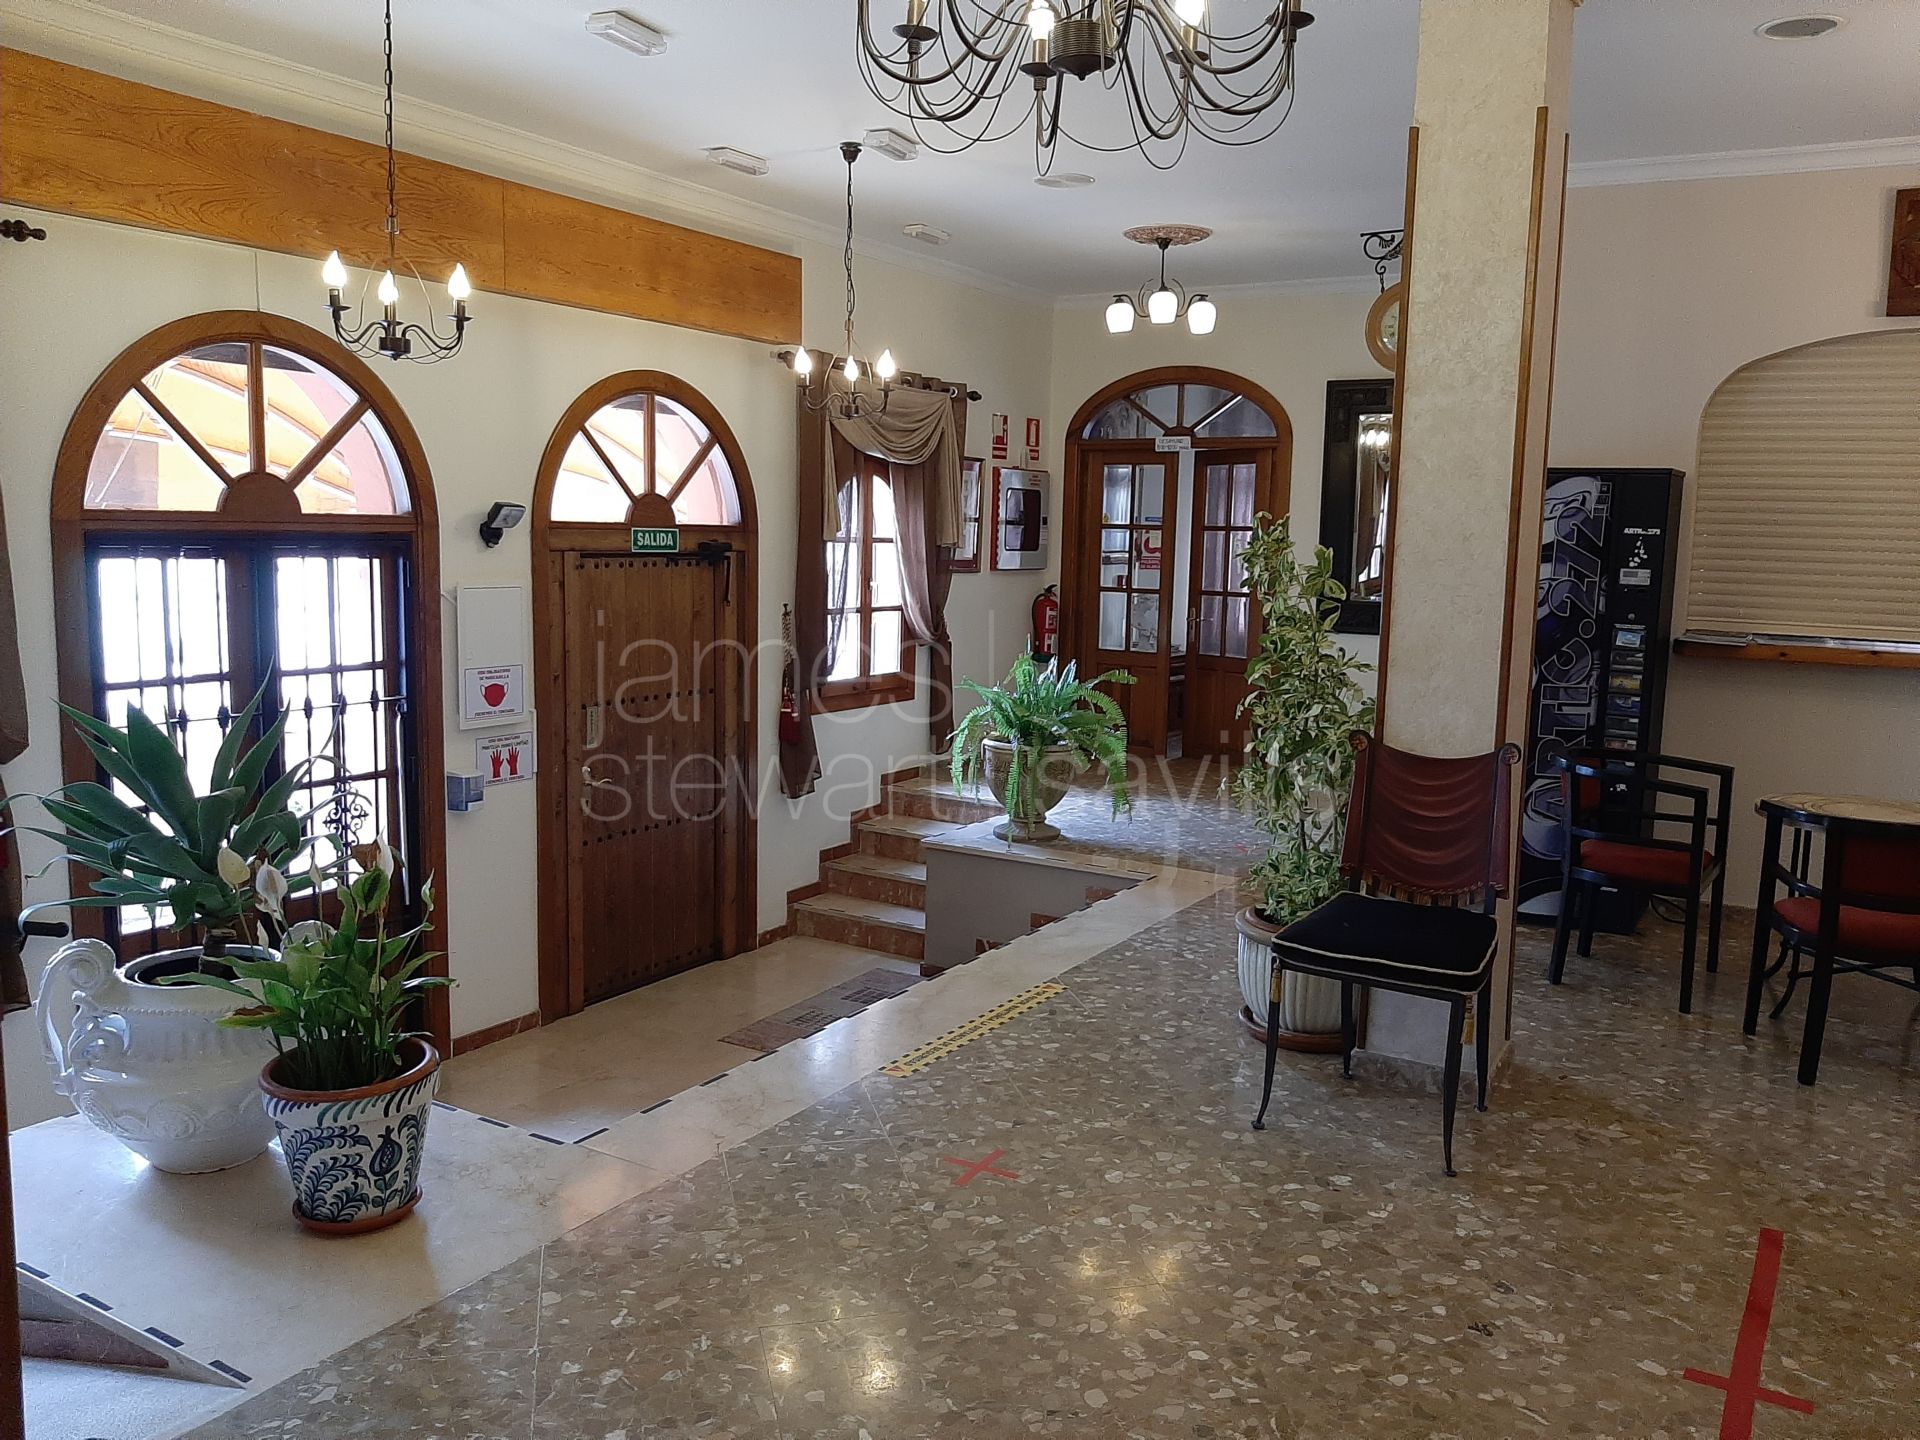 22 bedroom hostal in the heart of the commercial centre of Sotogrande